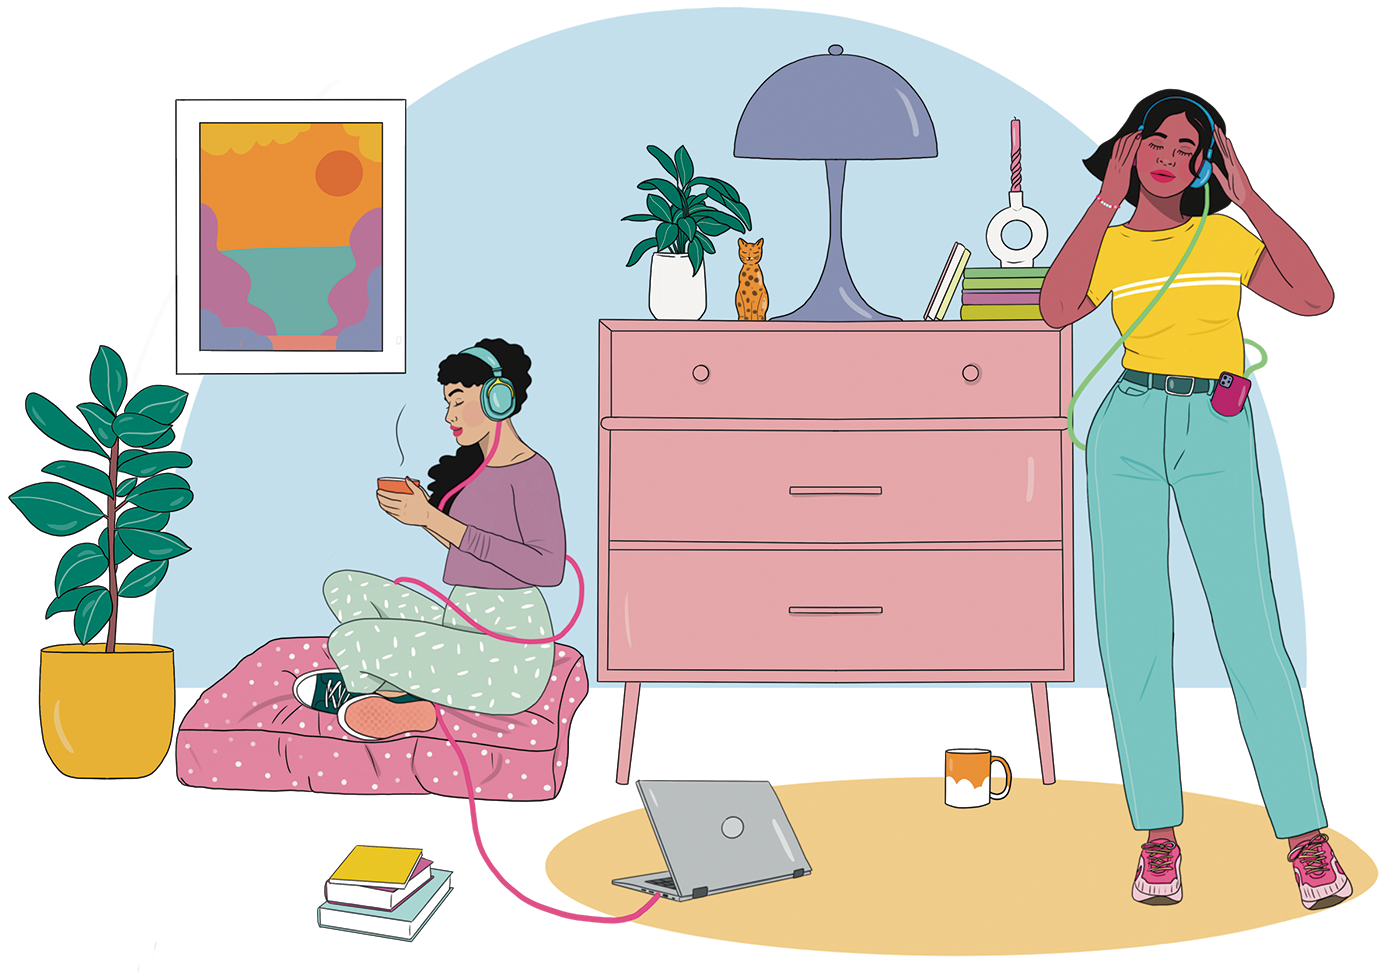 An illustration of two women listening to headphones